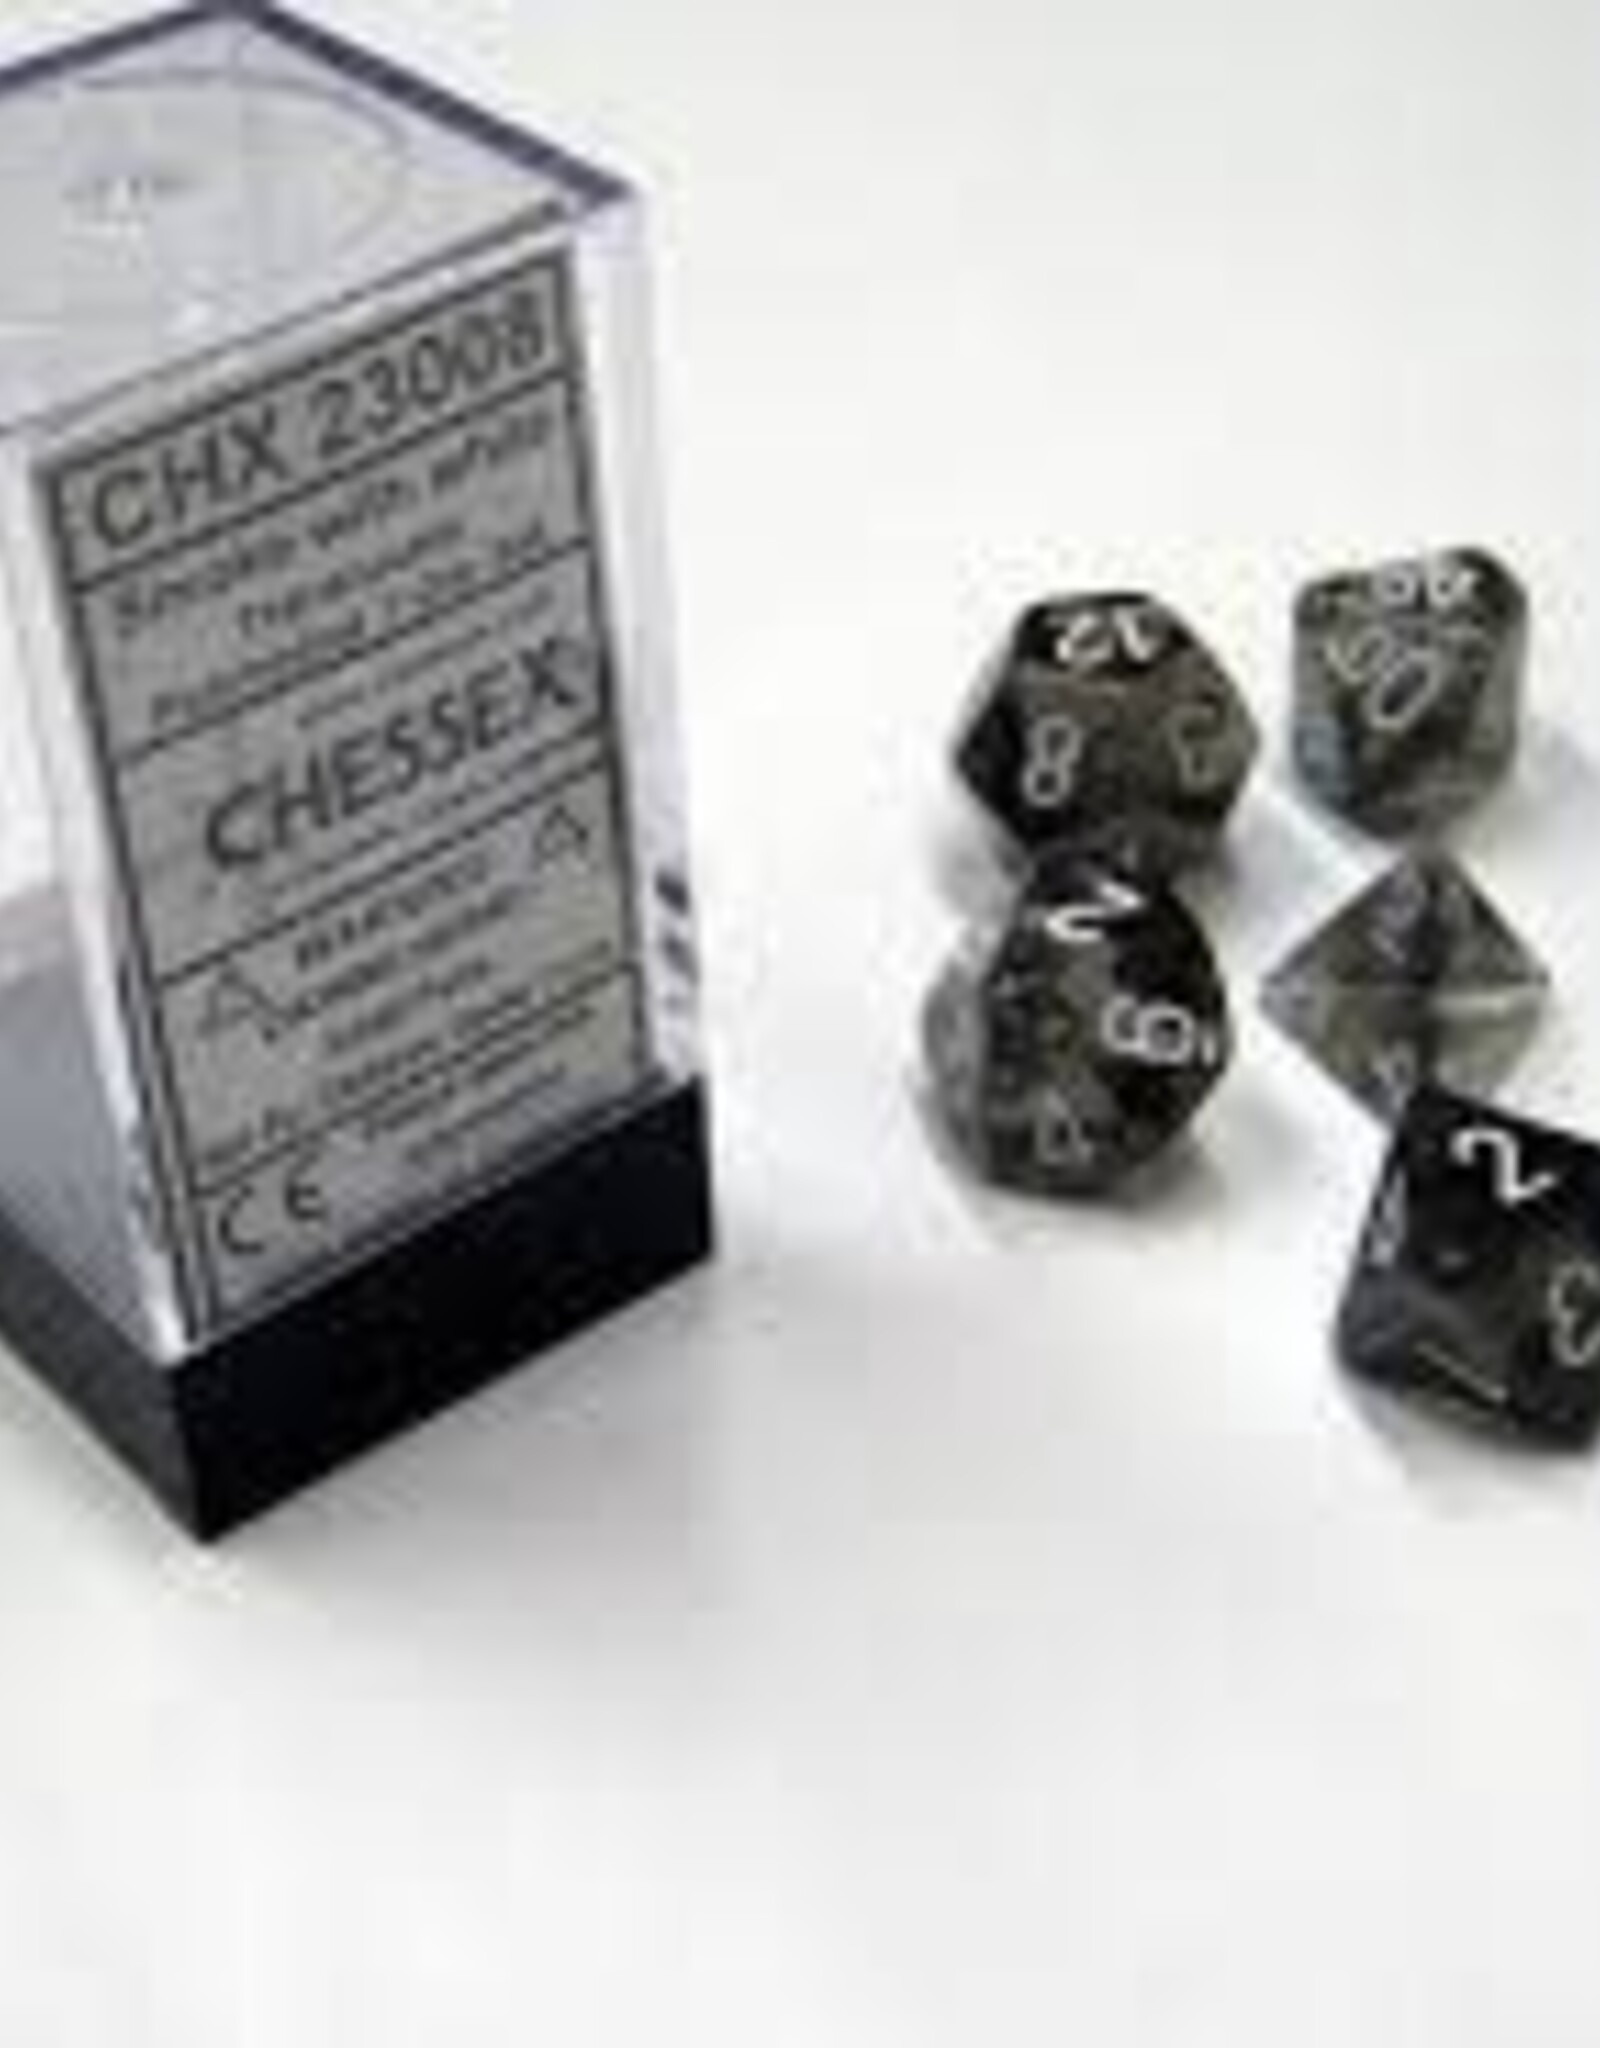 Chessex Dice - 7pc Translucent Polyhedral Smoke w/White